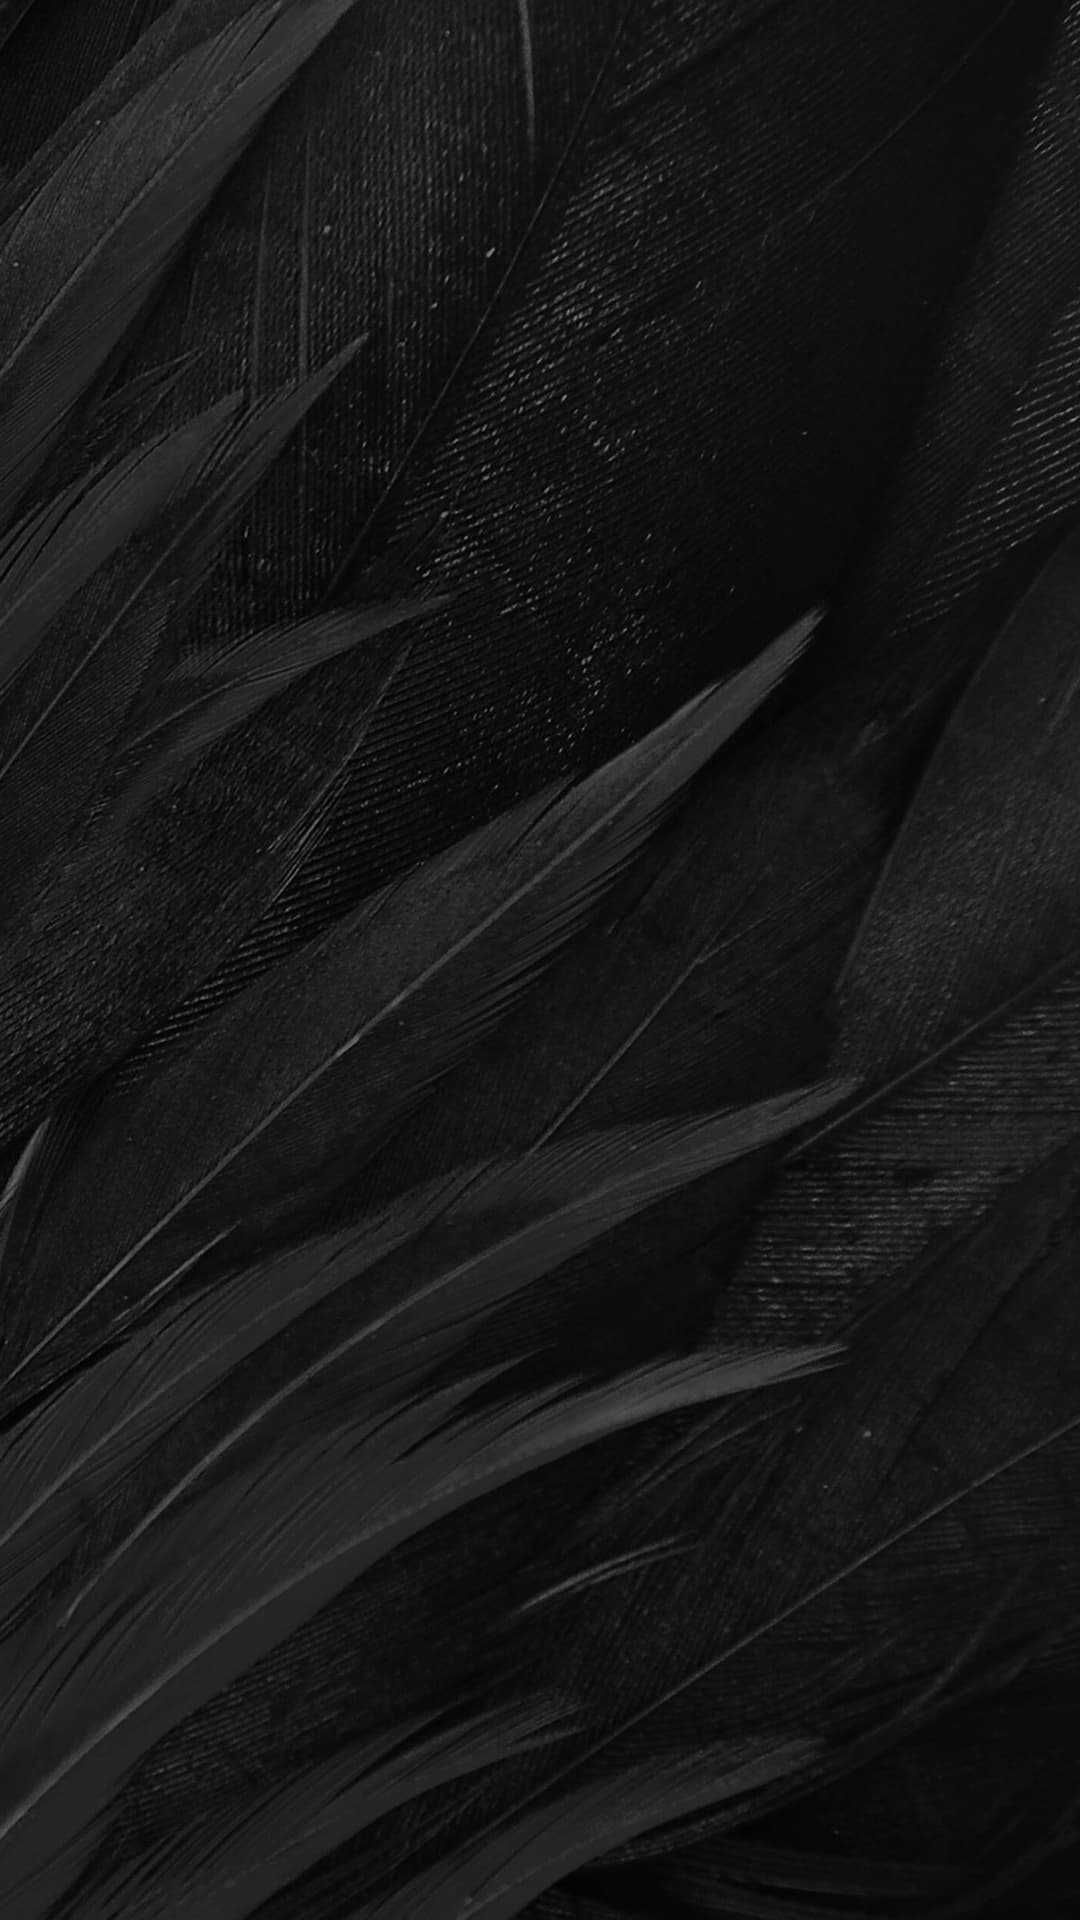 Matte black, Slick texture, Non-glossy elegance, Modern chic, Absence of color, 1080x1920 Full HD Handy